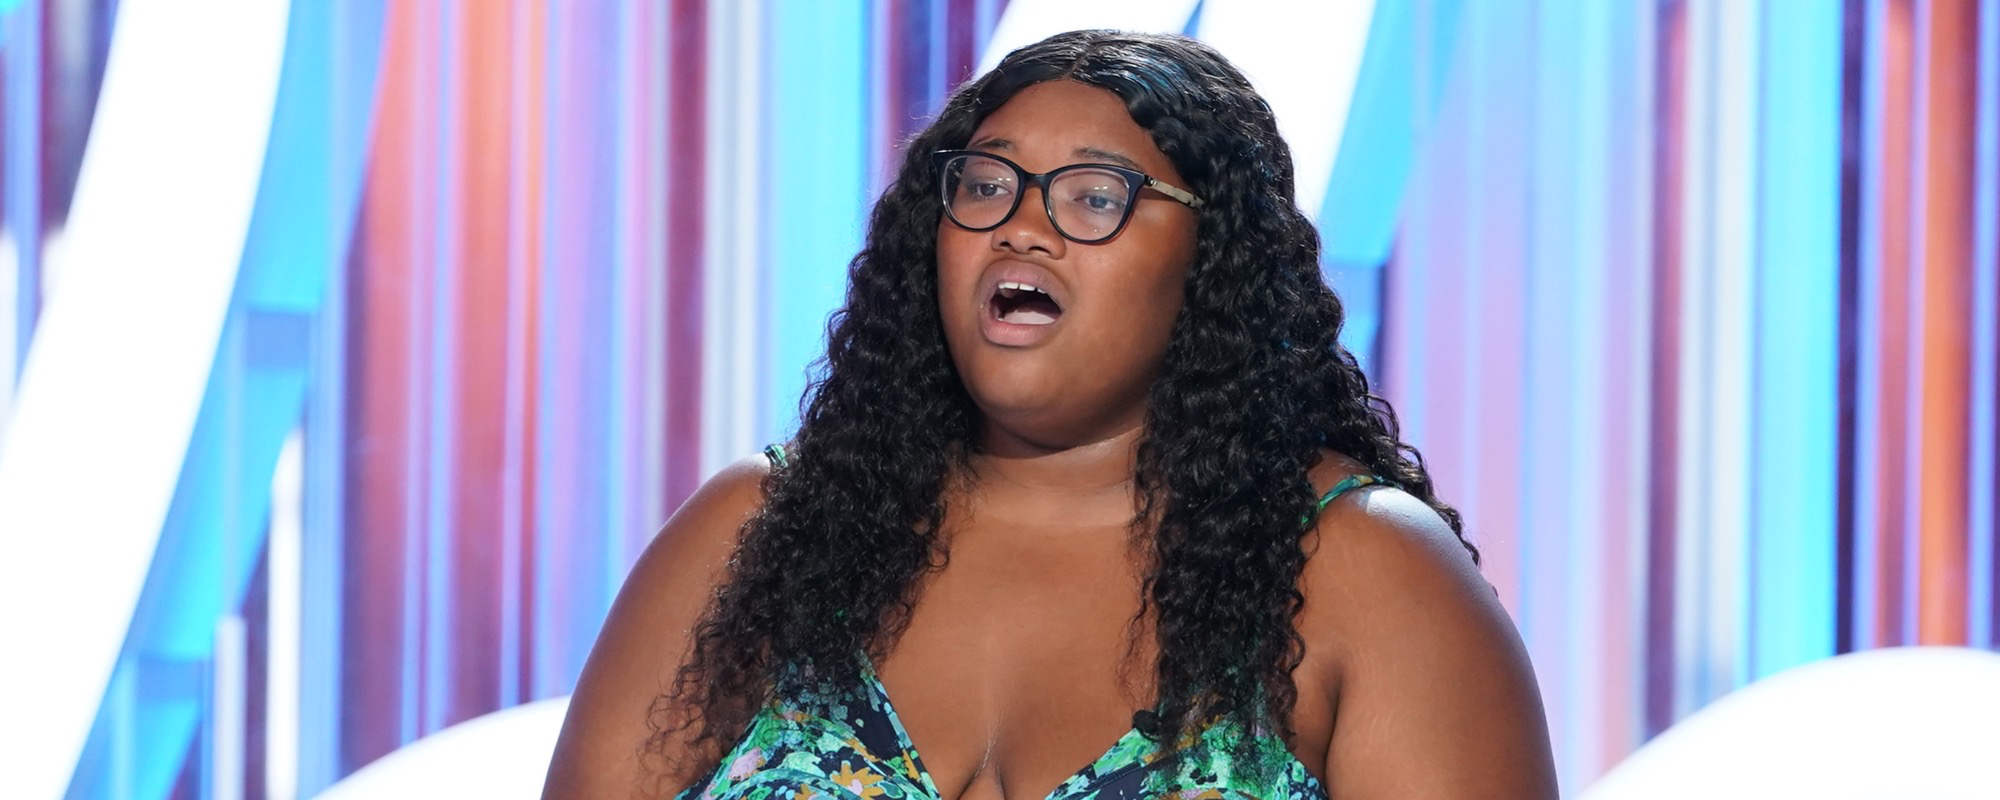 ‘American Idol’: Reette Thorns Moves Judges with Emotional “I Believe” by Fantasia